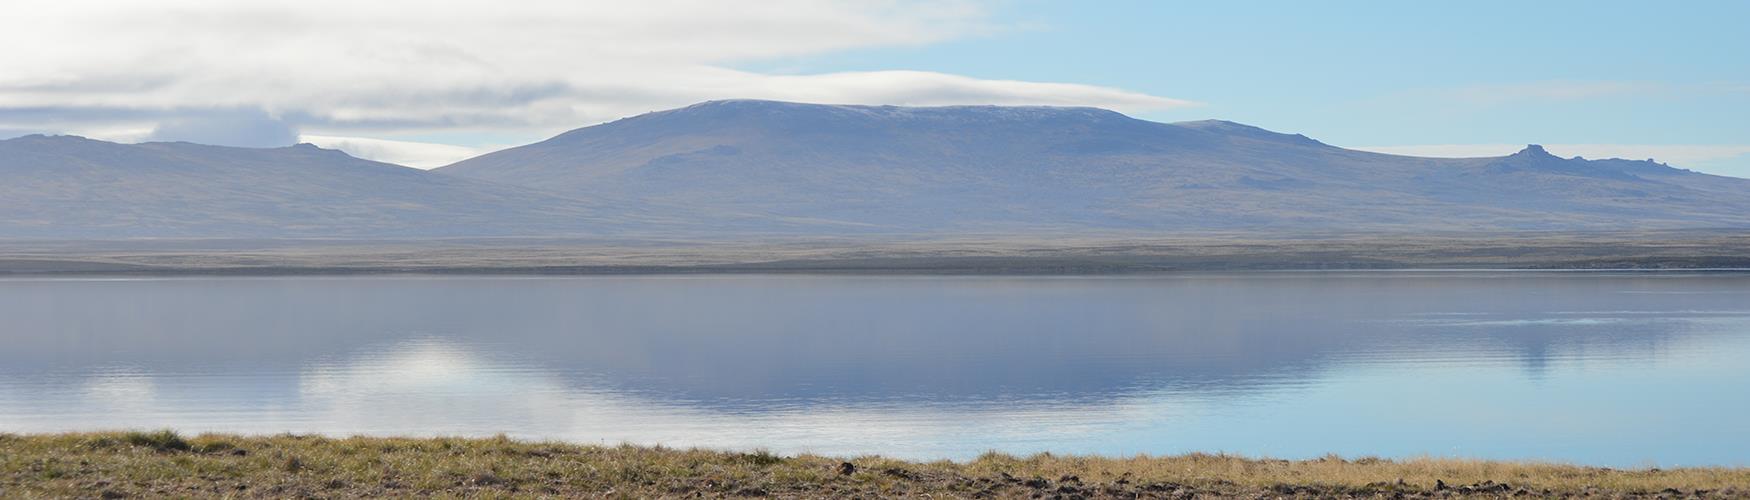 Mount Usborne is the highest peak of the Falkland Islands, located on the East Falkland